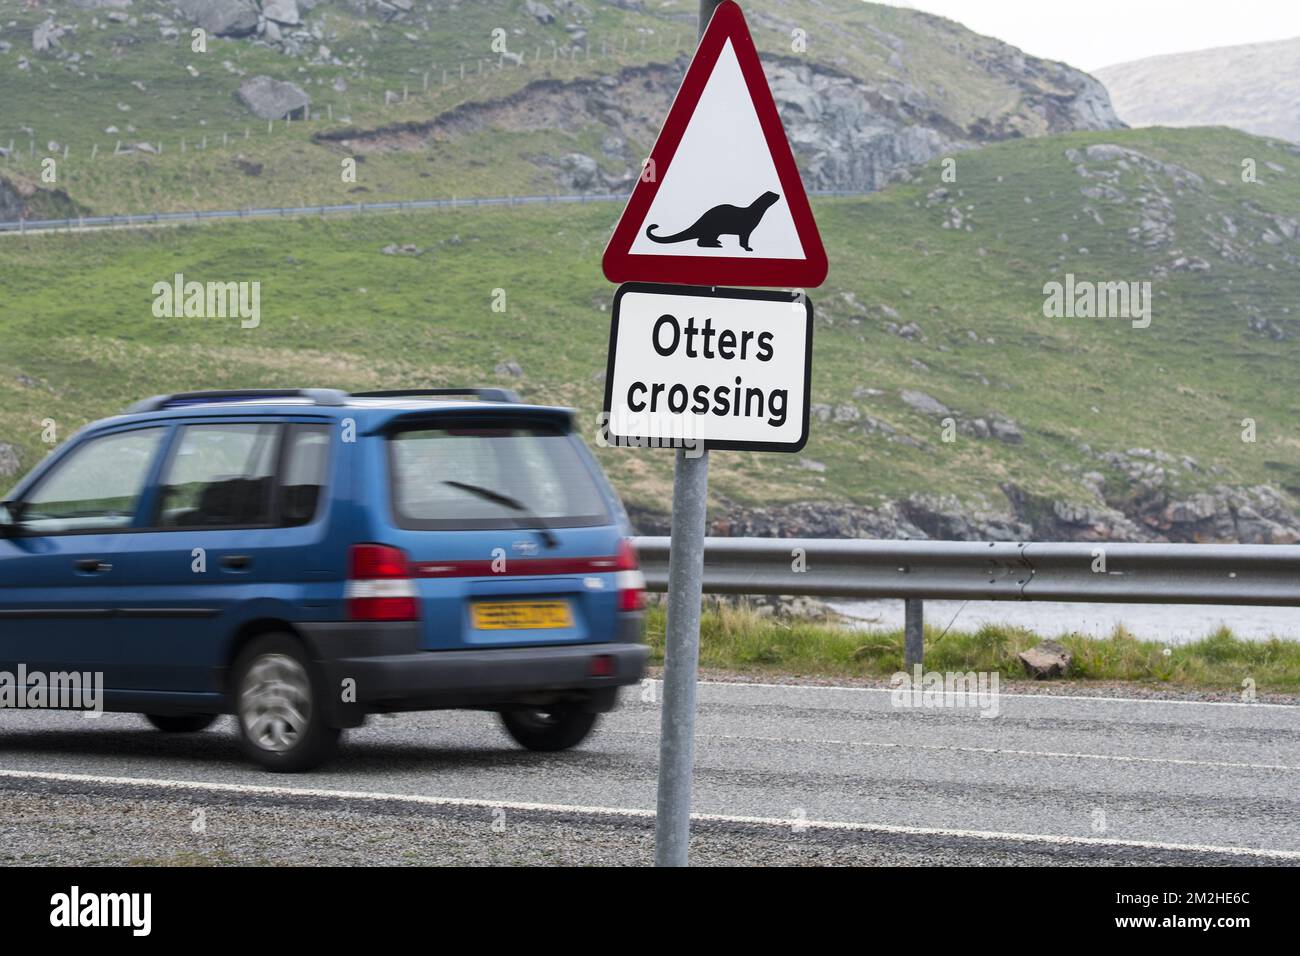 Eurasian otter / European otter (Lutra lutra) road warning sign for otters crossing street in coastal Scotland, UK | Panneau de signalisation pour loutre d'Europe / loutre européenne (Lutra lutra) 09/06/2018 Stock Photo